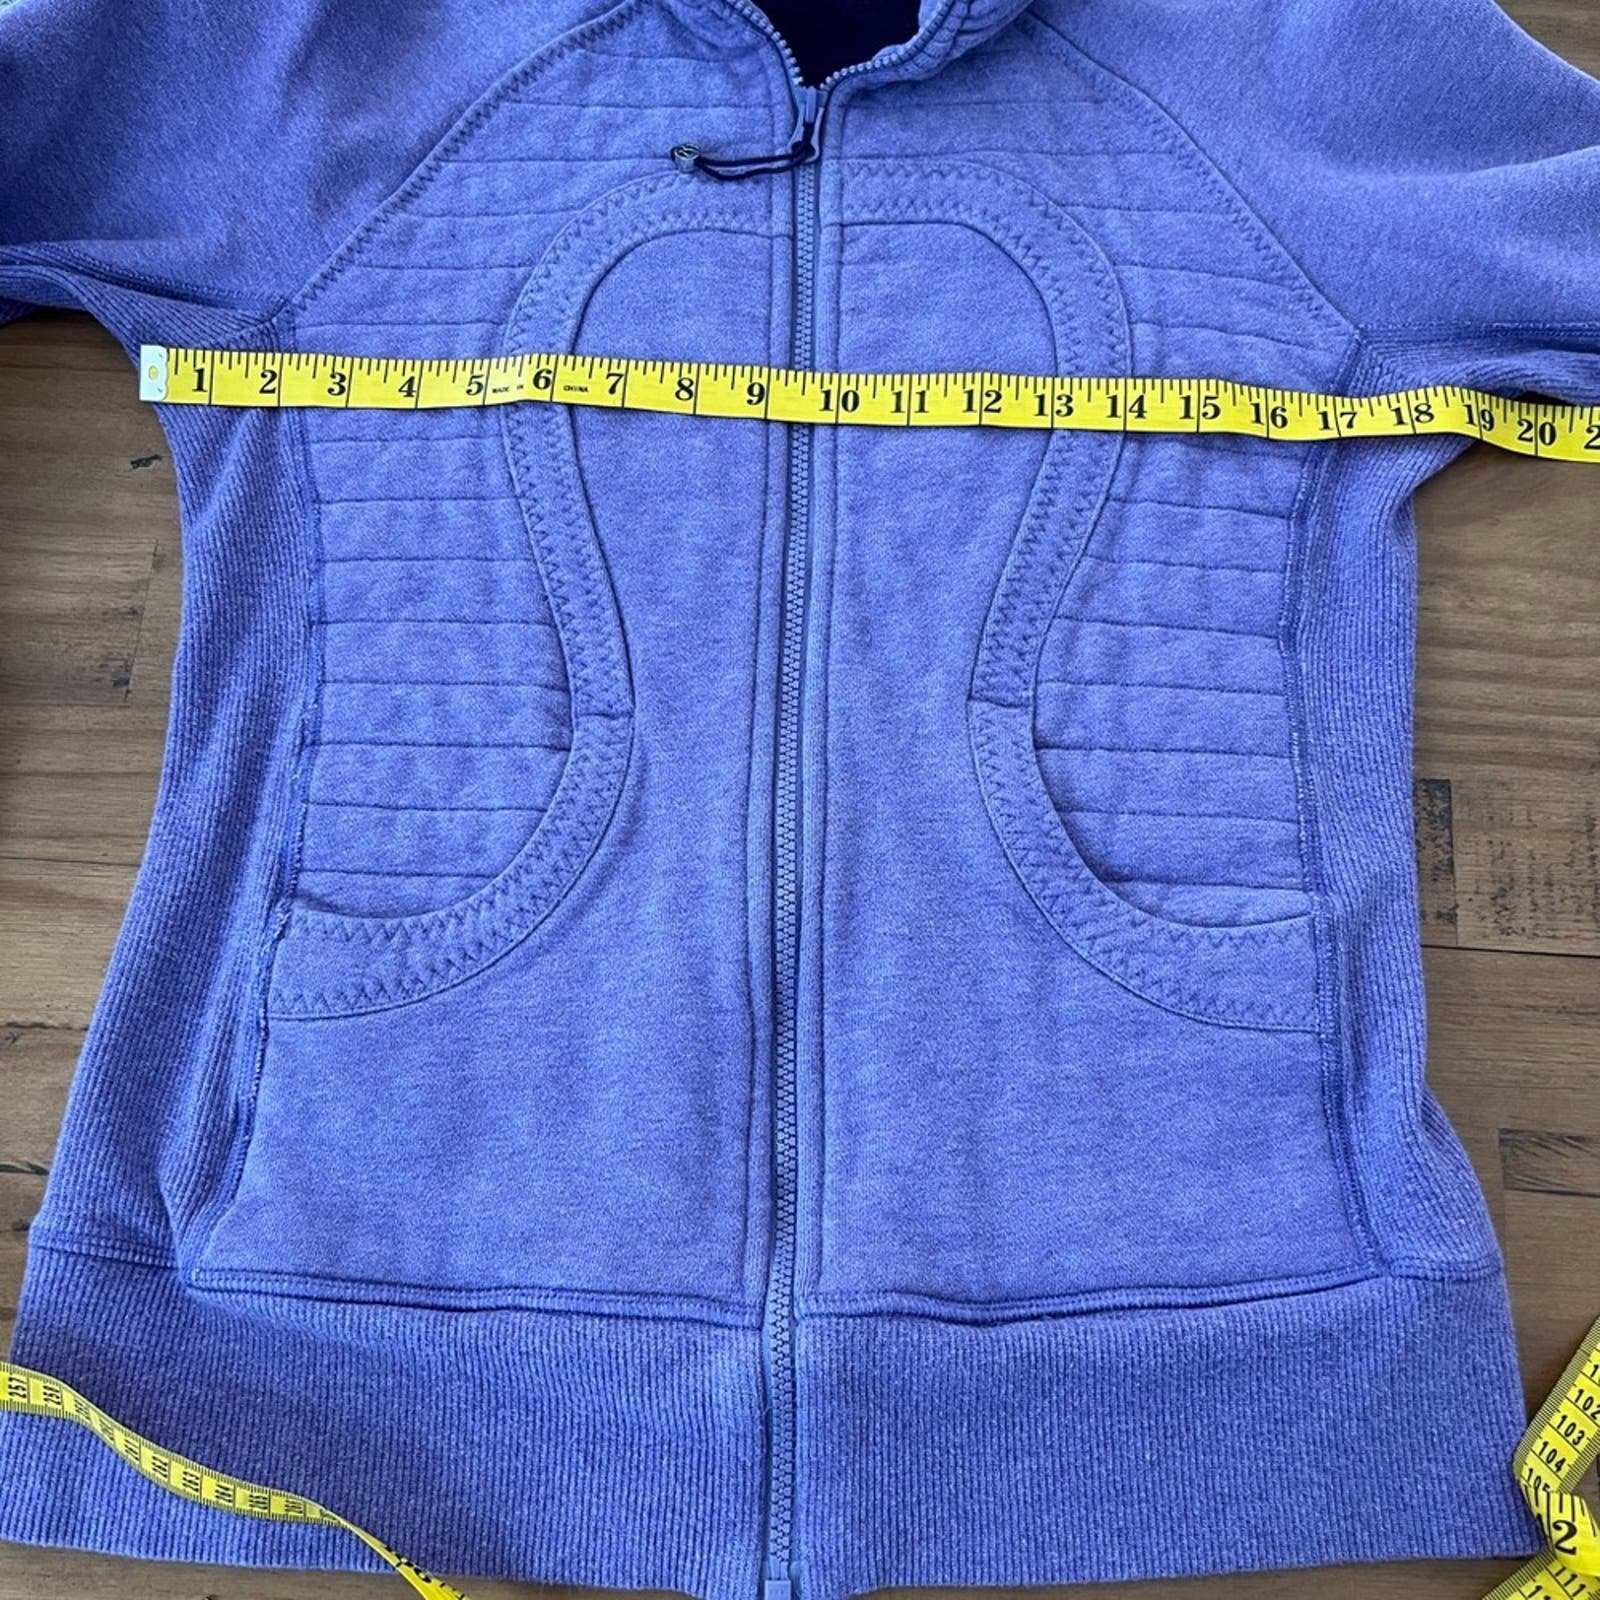 Perfect Lululemon zip up sweater size 8 p3WHrcMEg Outlet Store